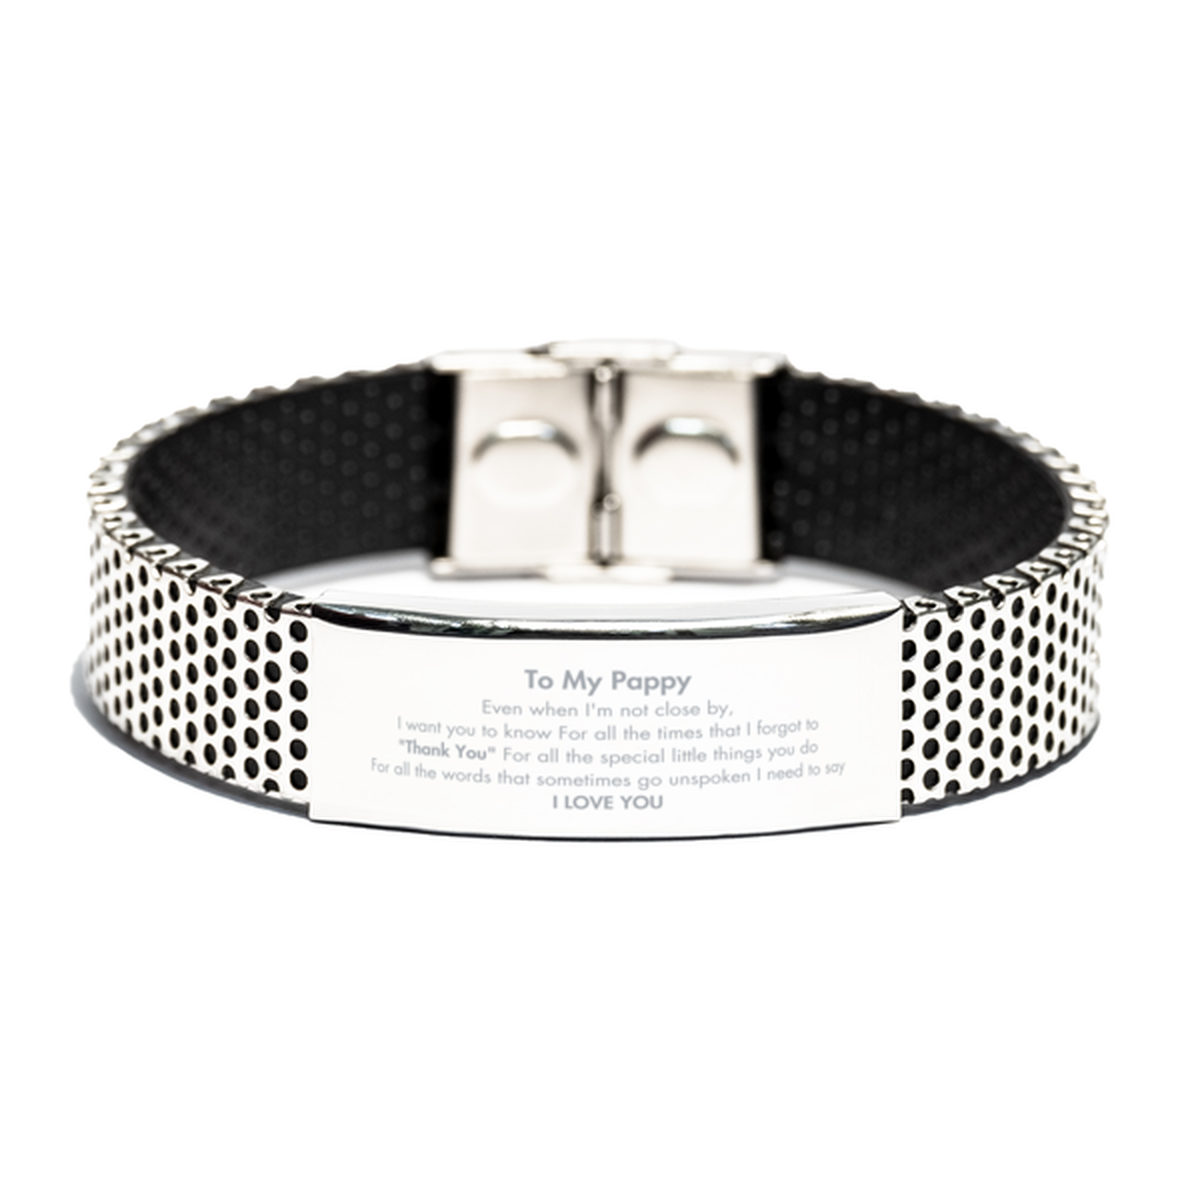 Thank You Gifts for Pappy, Keepsake Stainless Steel Bracelet Gifts for Pappy Birthday Mother's day Father's Day Pappy For all the words That sometimes go unspoken I need to say I LOVE YOU